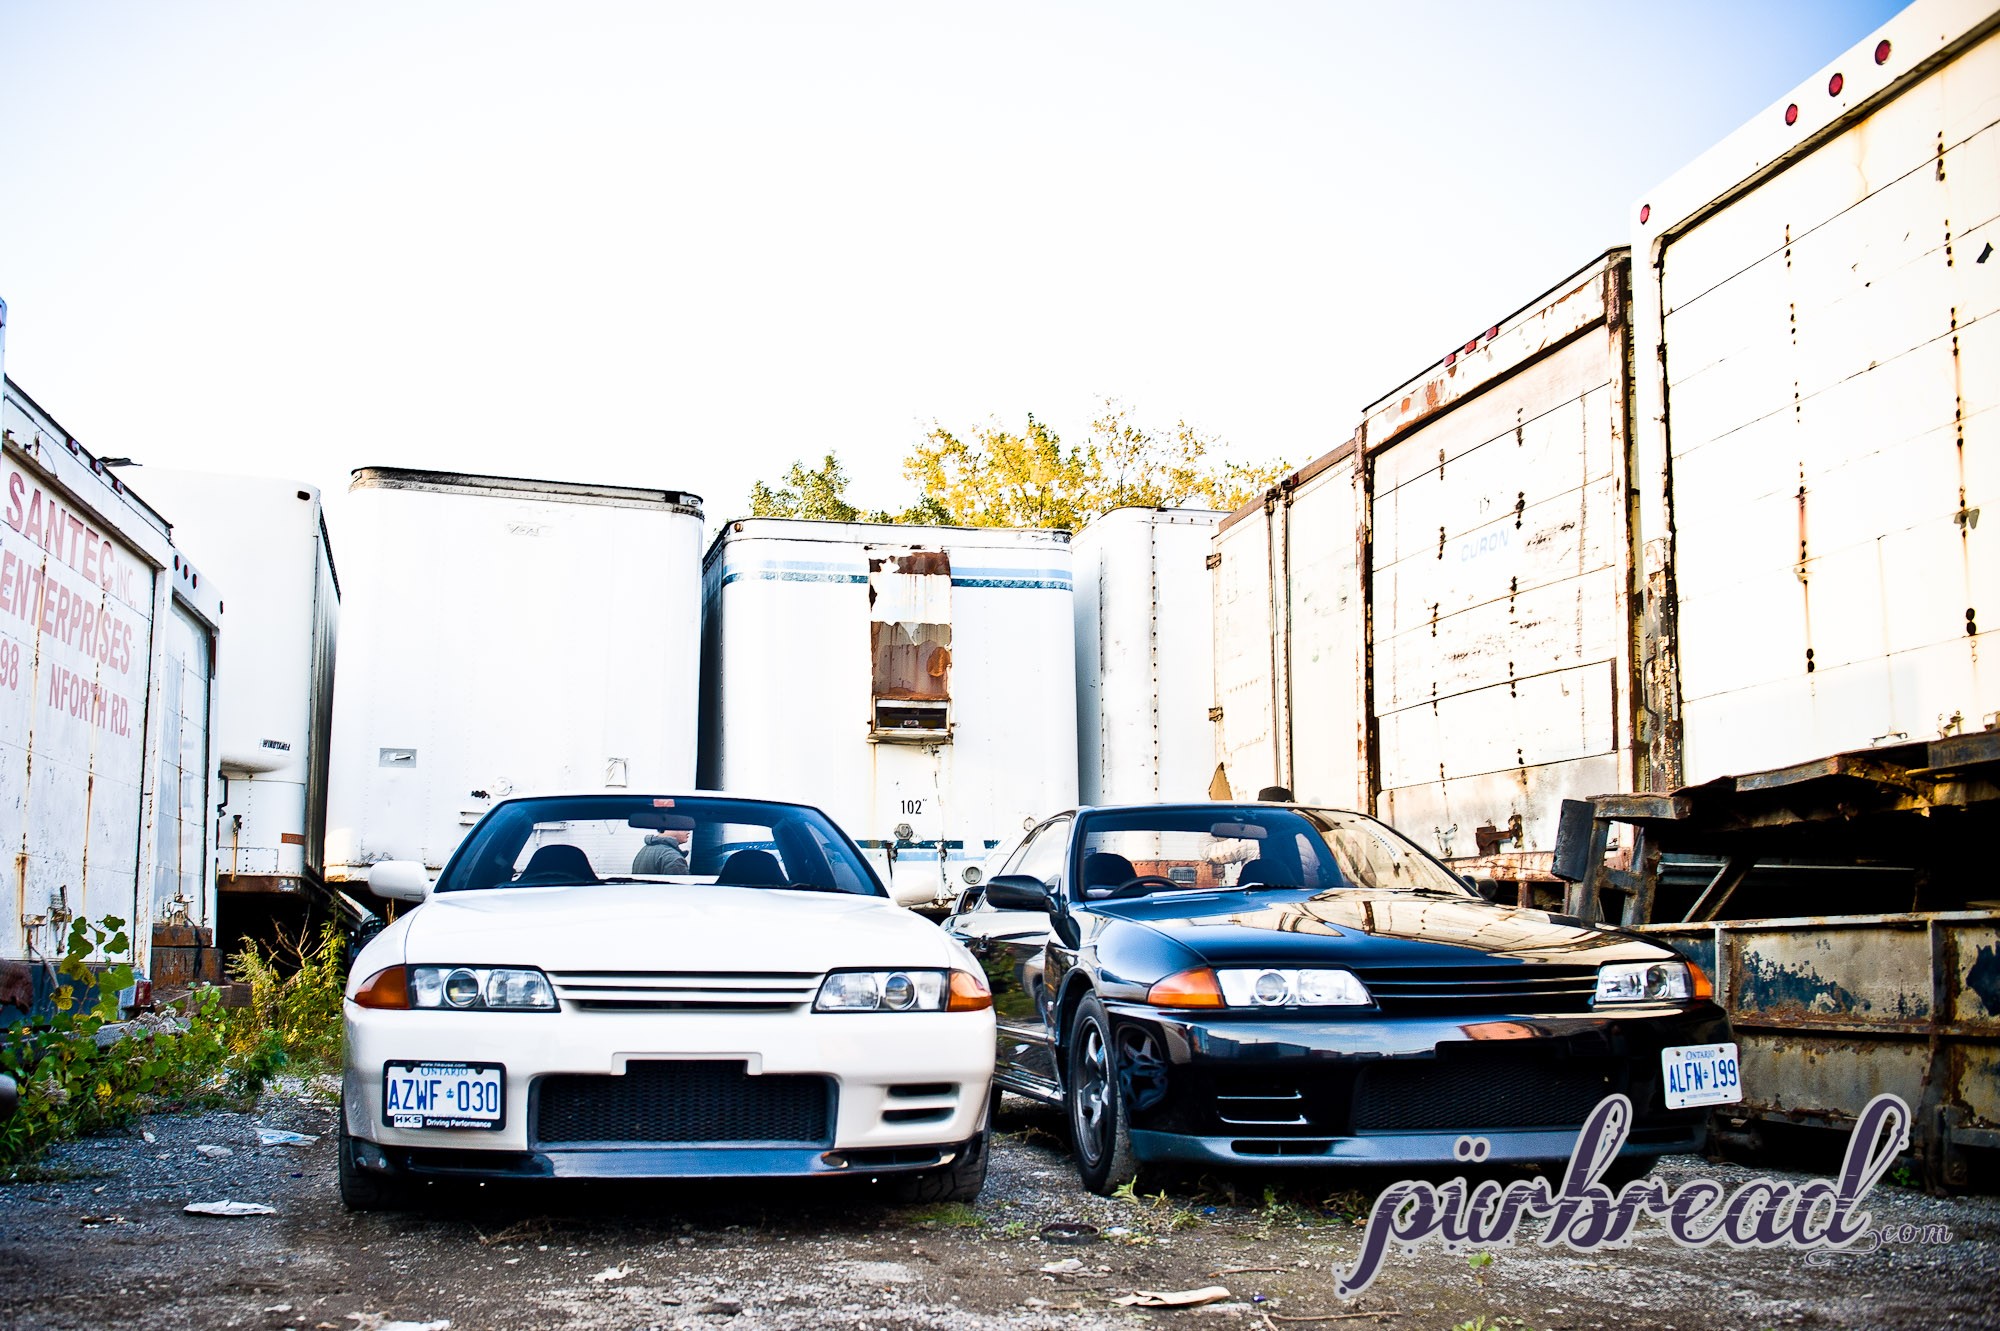 General 2000x1331 car vehicle Nissan white cars black cars Japanese cars frontal view watermarked licence plates Nissan Skyline